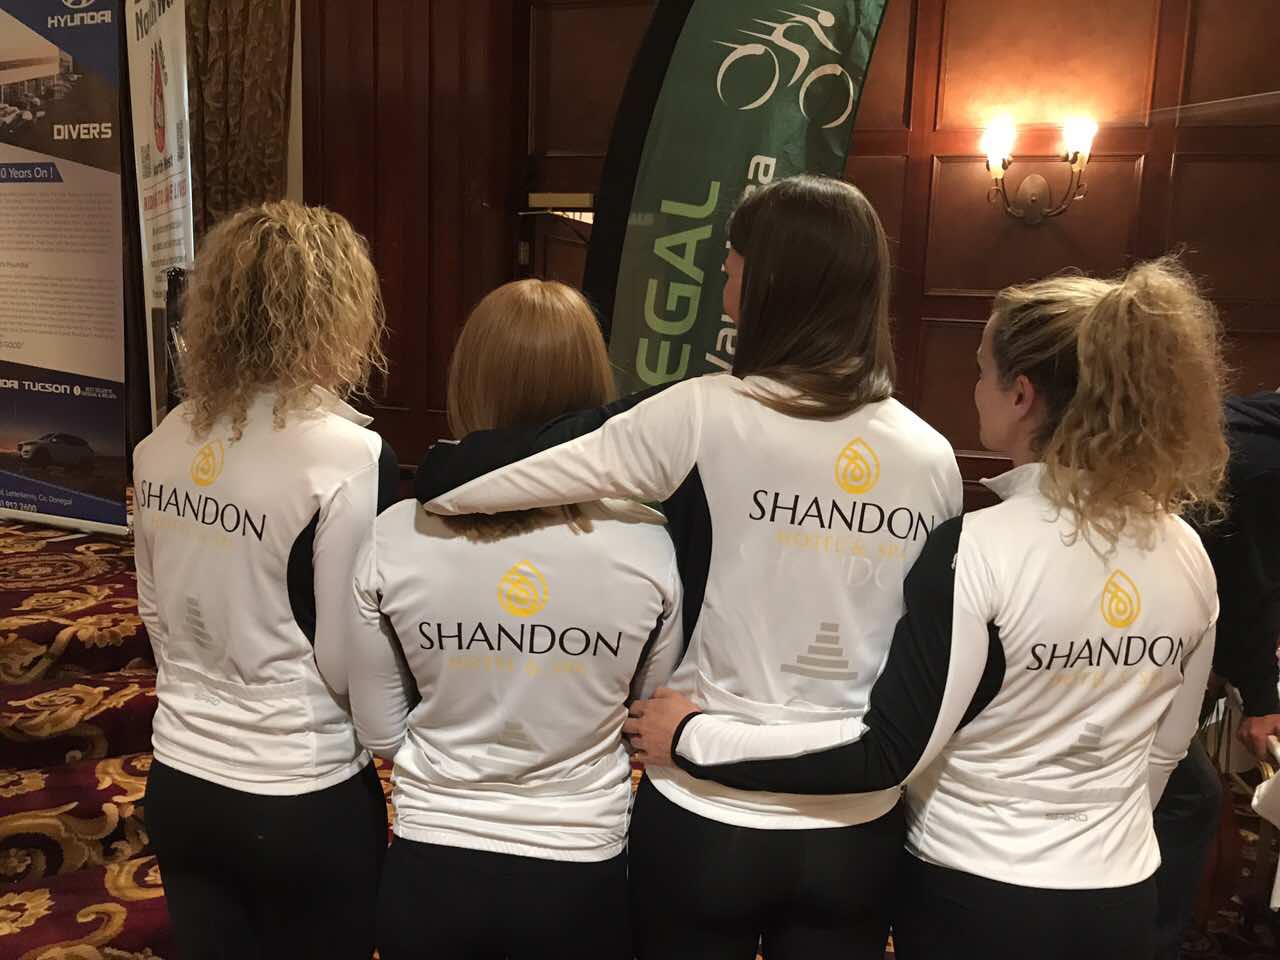 Shandon’s Team Tri Quads Wins Overall Ladies Team At Donegal Ultra!